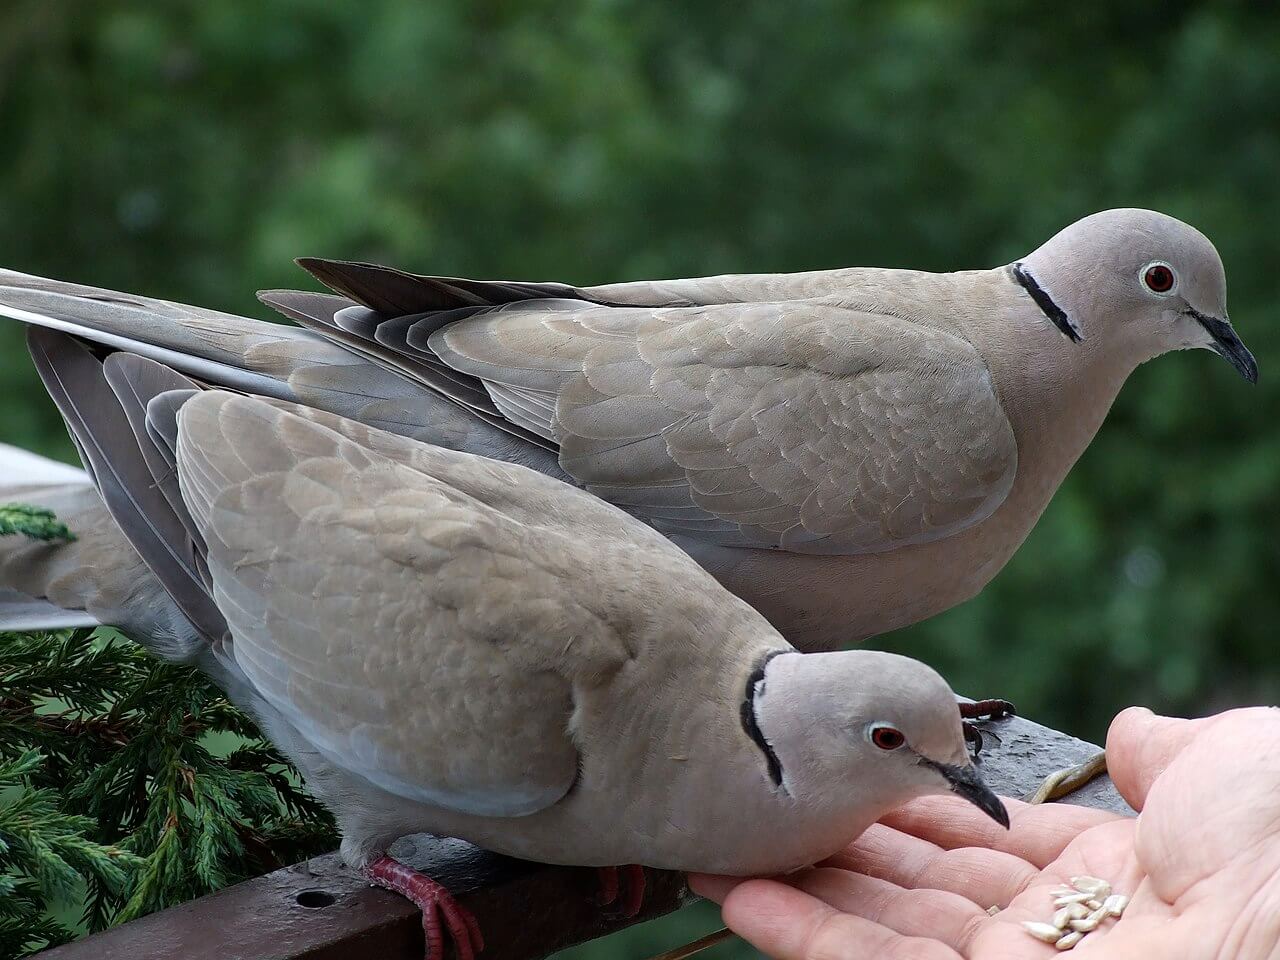 A Eurasian collared dove eating out of a human's hands.